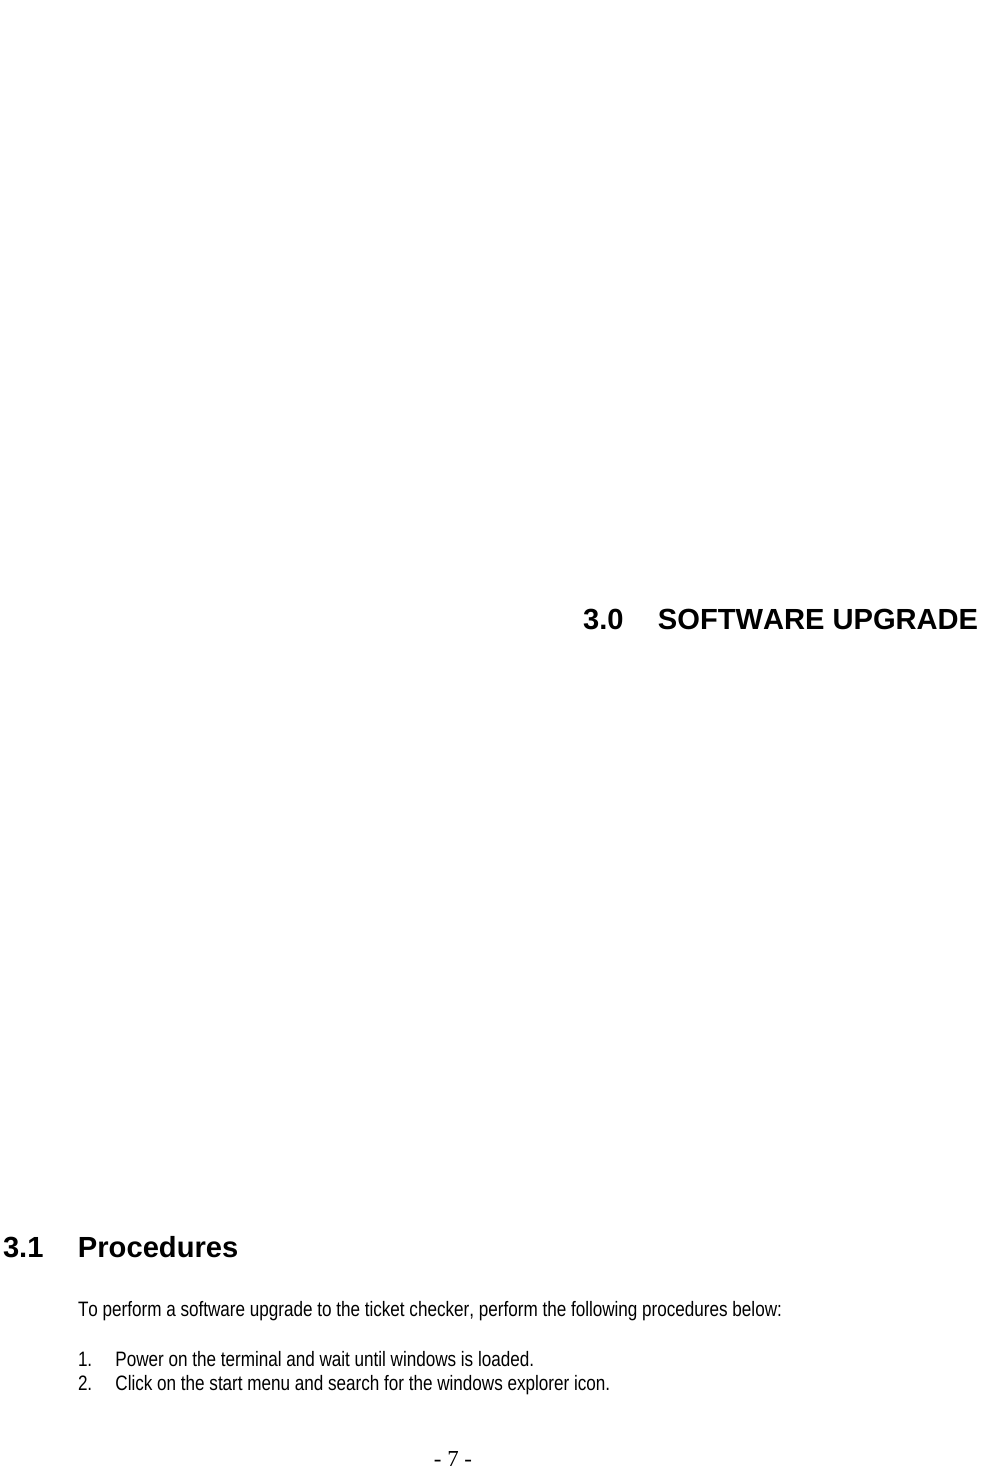     - 7 -                   3.0 SOFTWARE UPGRADE                     3.1 Procedures  To perform a software upgrade to the ticket checker, perform the following procedures below:  1. Power on the terminal and wait until windows is loaded. 2. Click on the start menu and search for the windows explorer icon.  